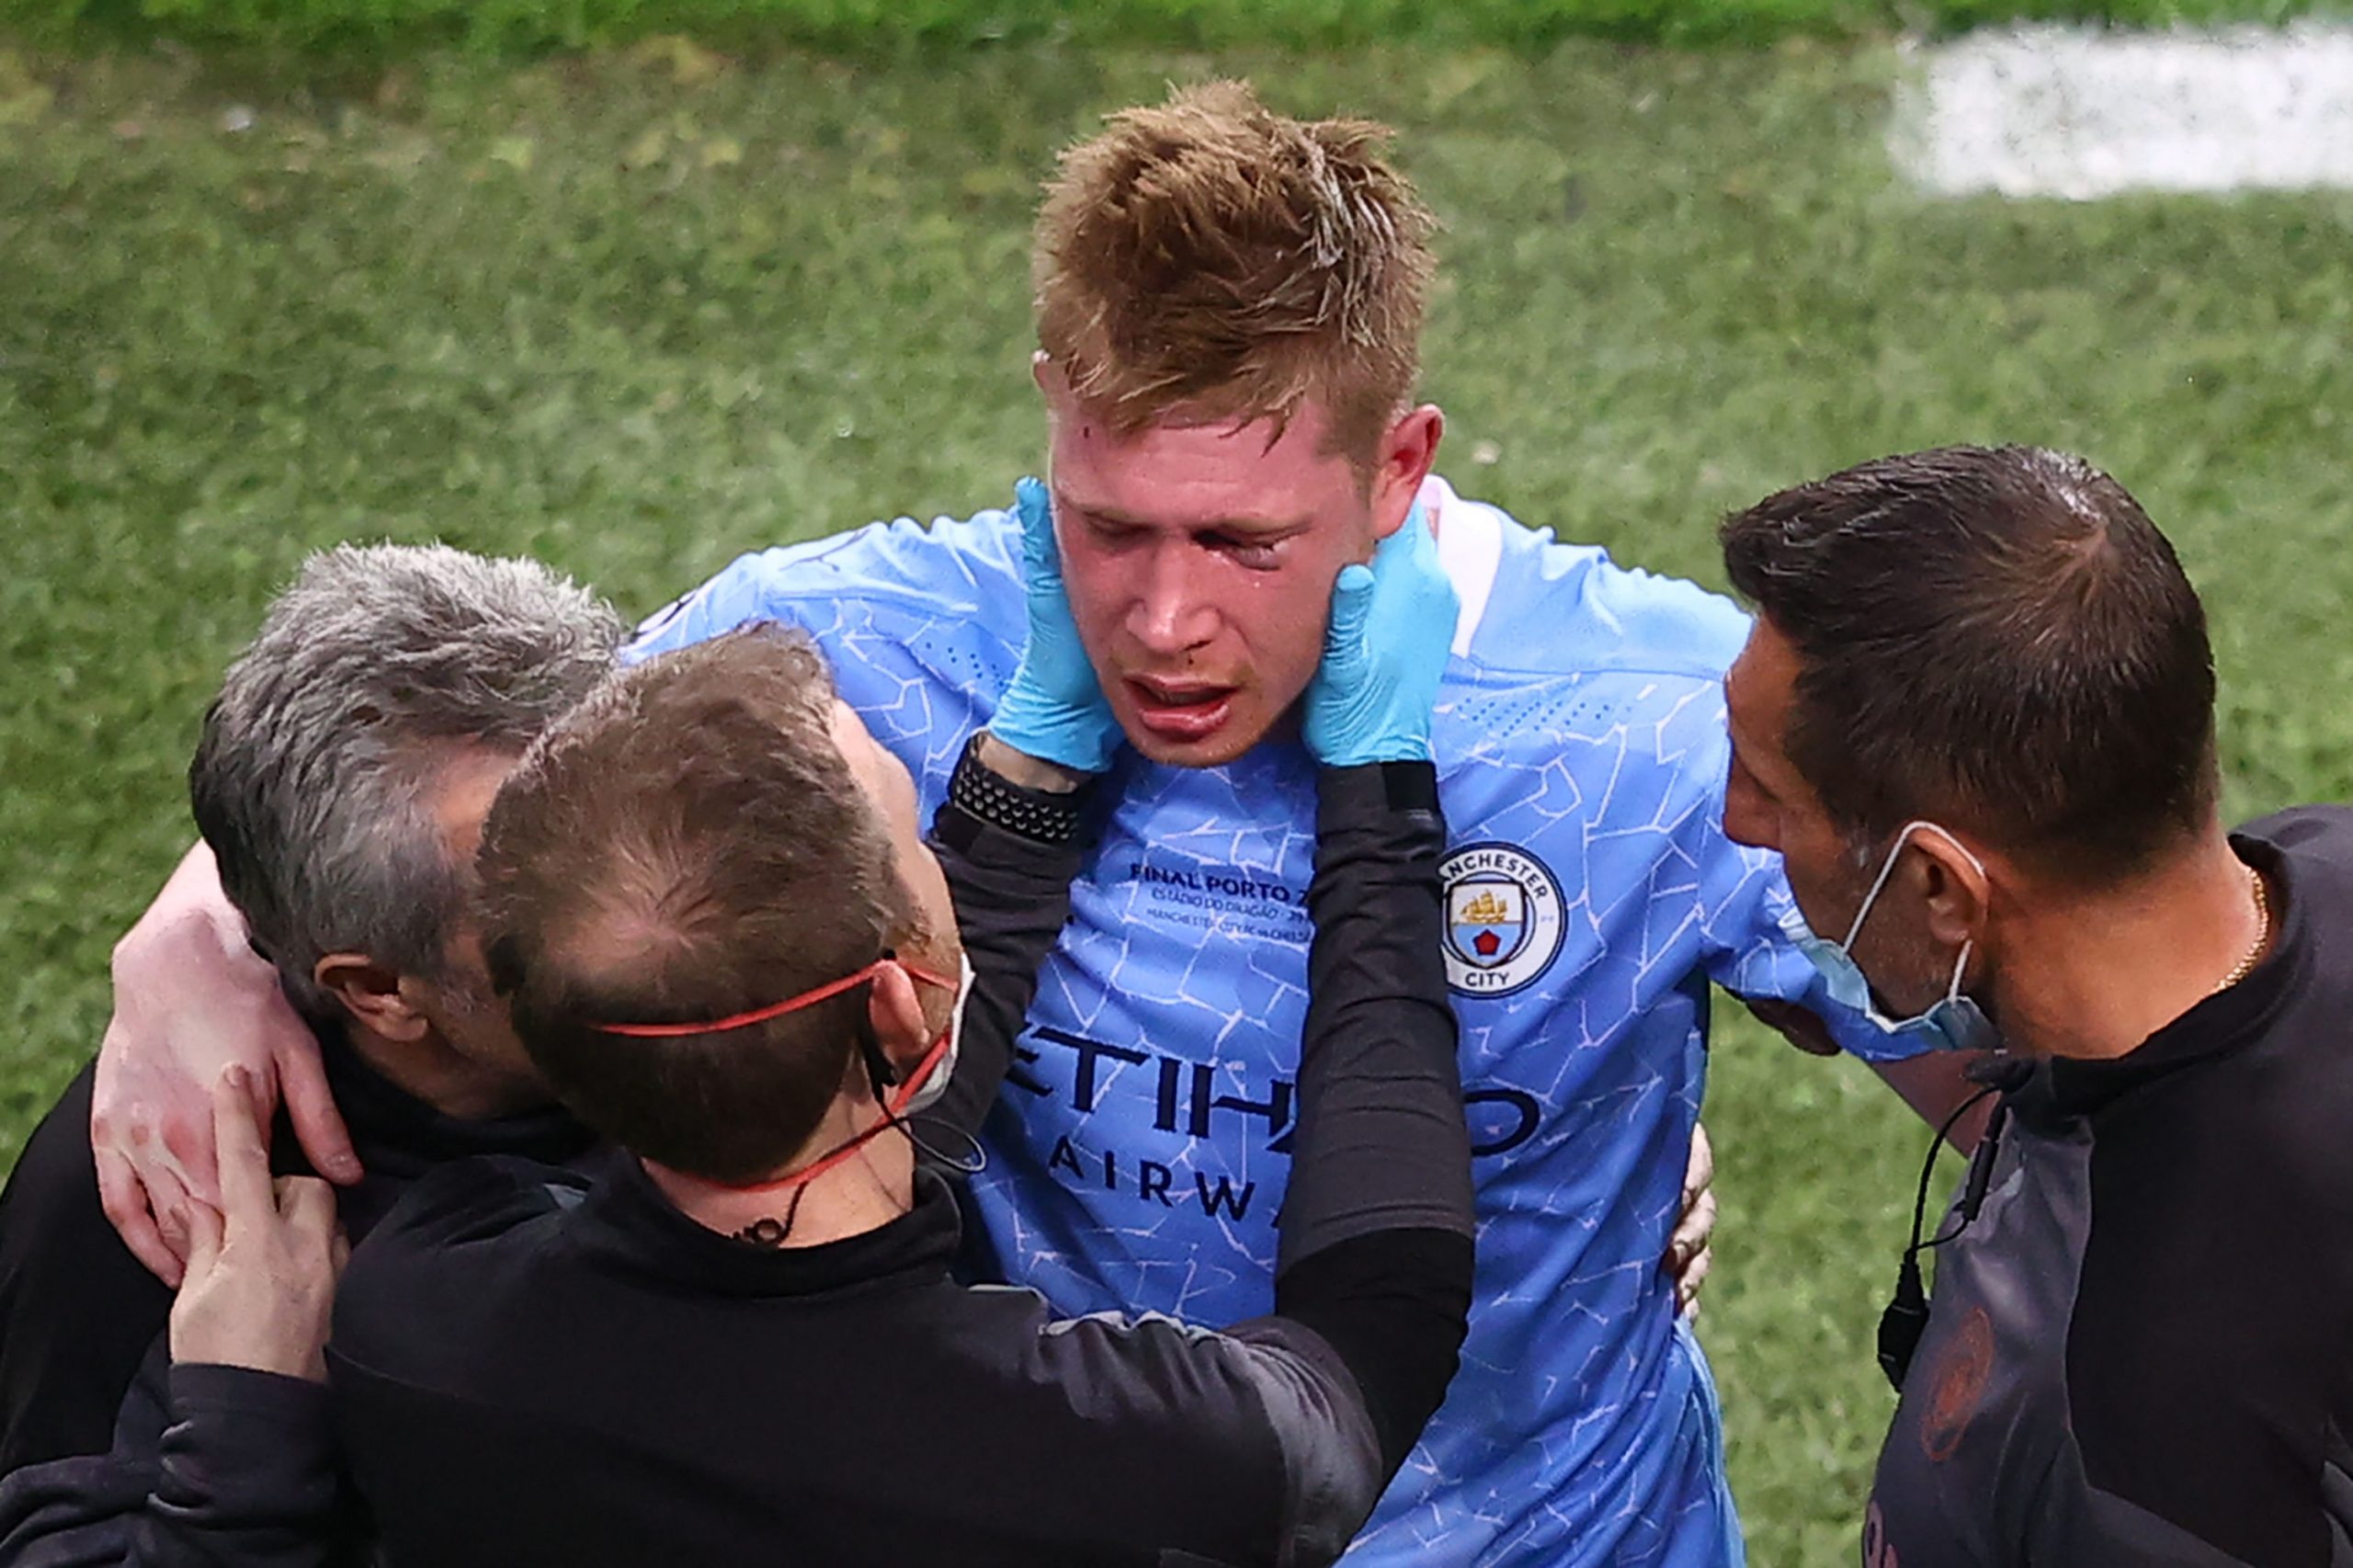 Tearful Kevin De Bruyne forced off with head injury in Champions League final